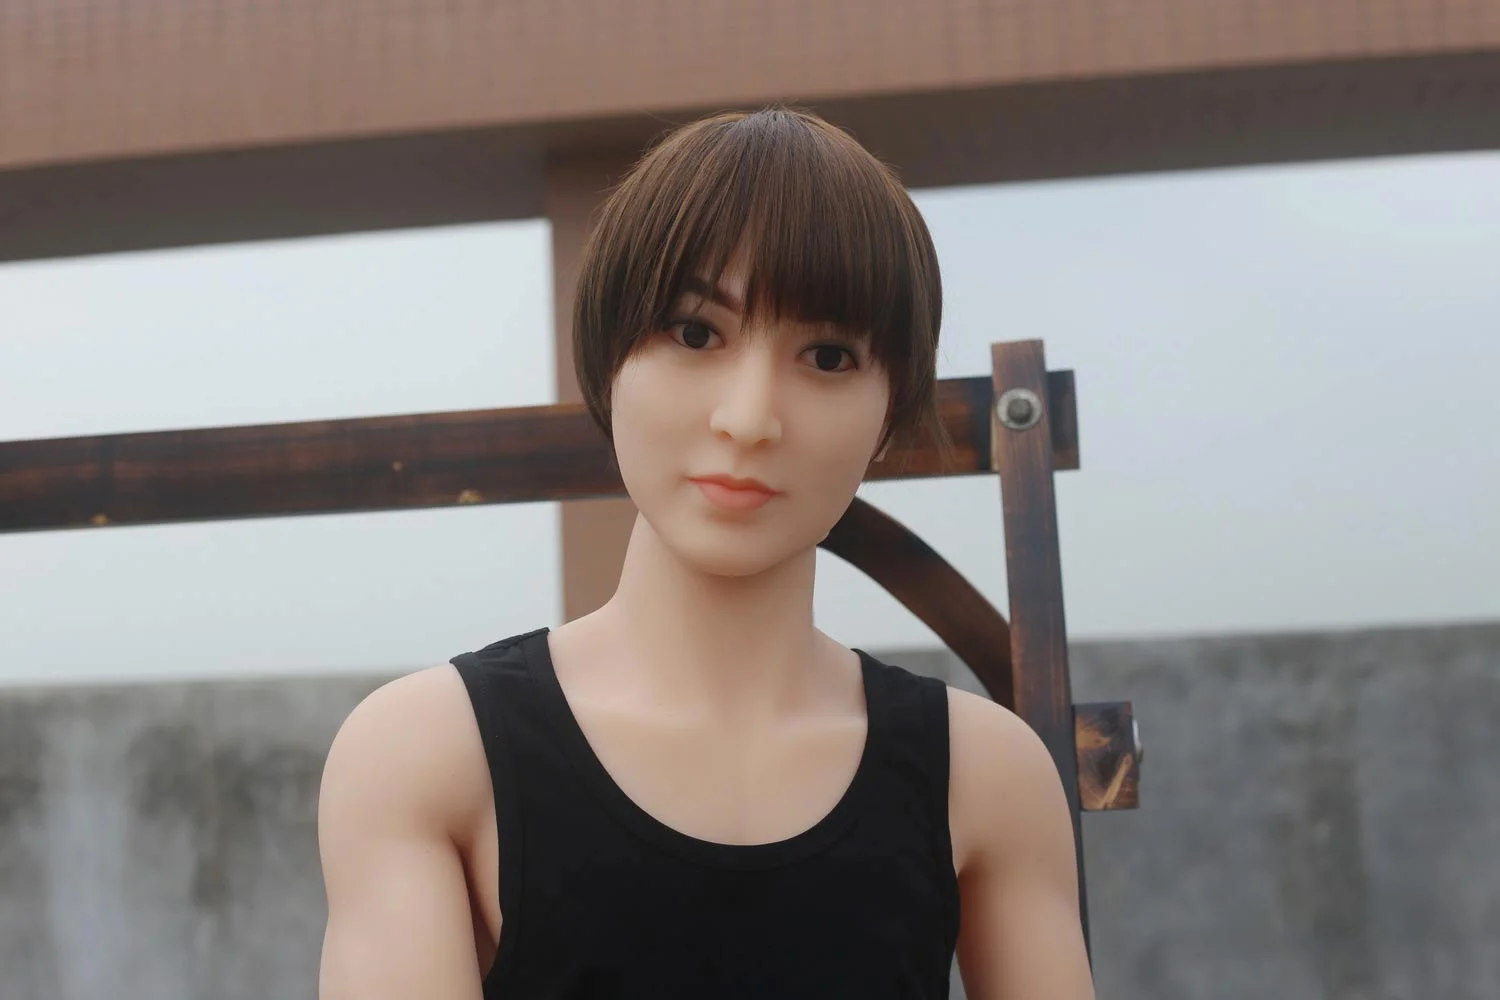 Male-sex-doll-with-short-brown-hair